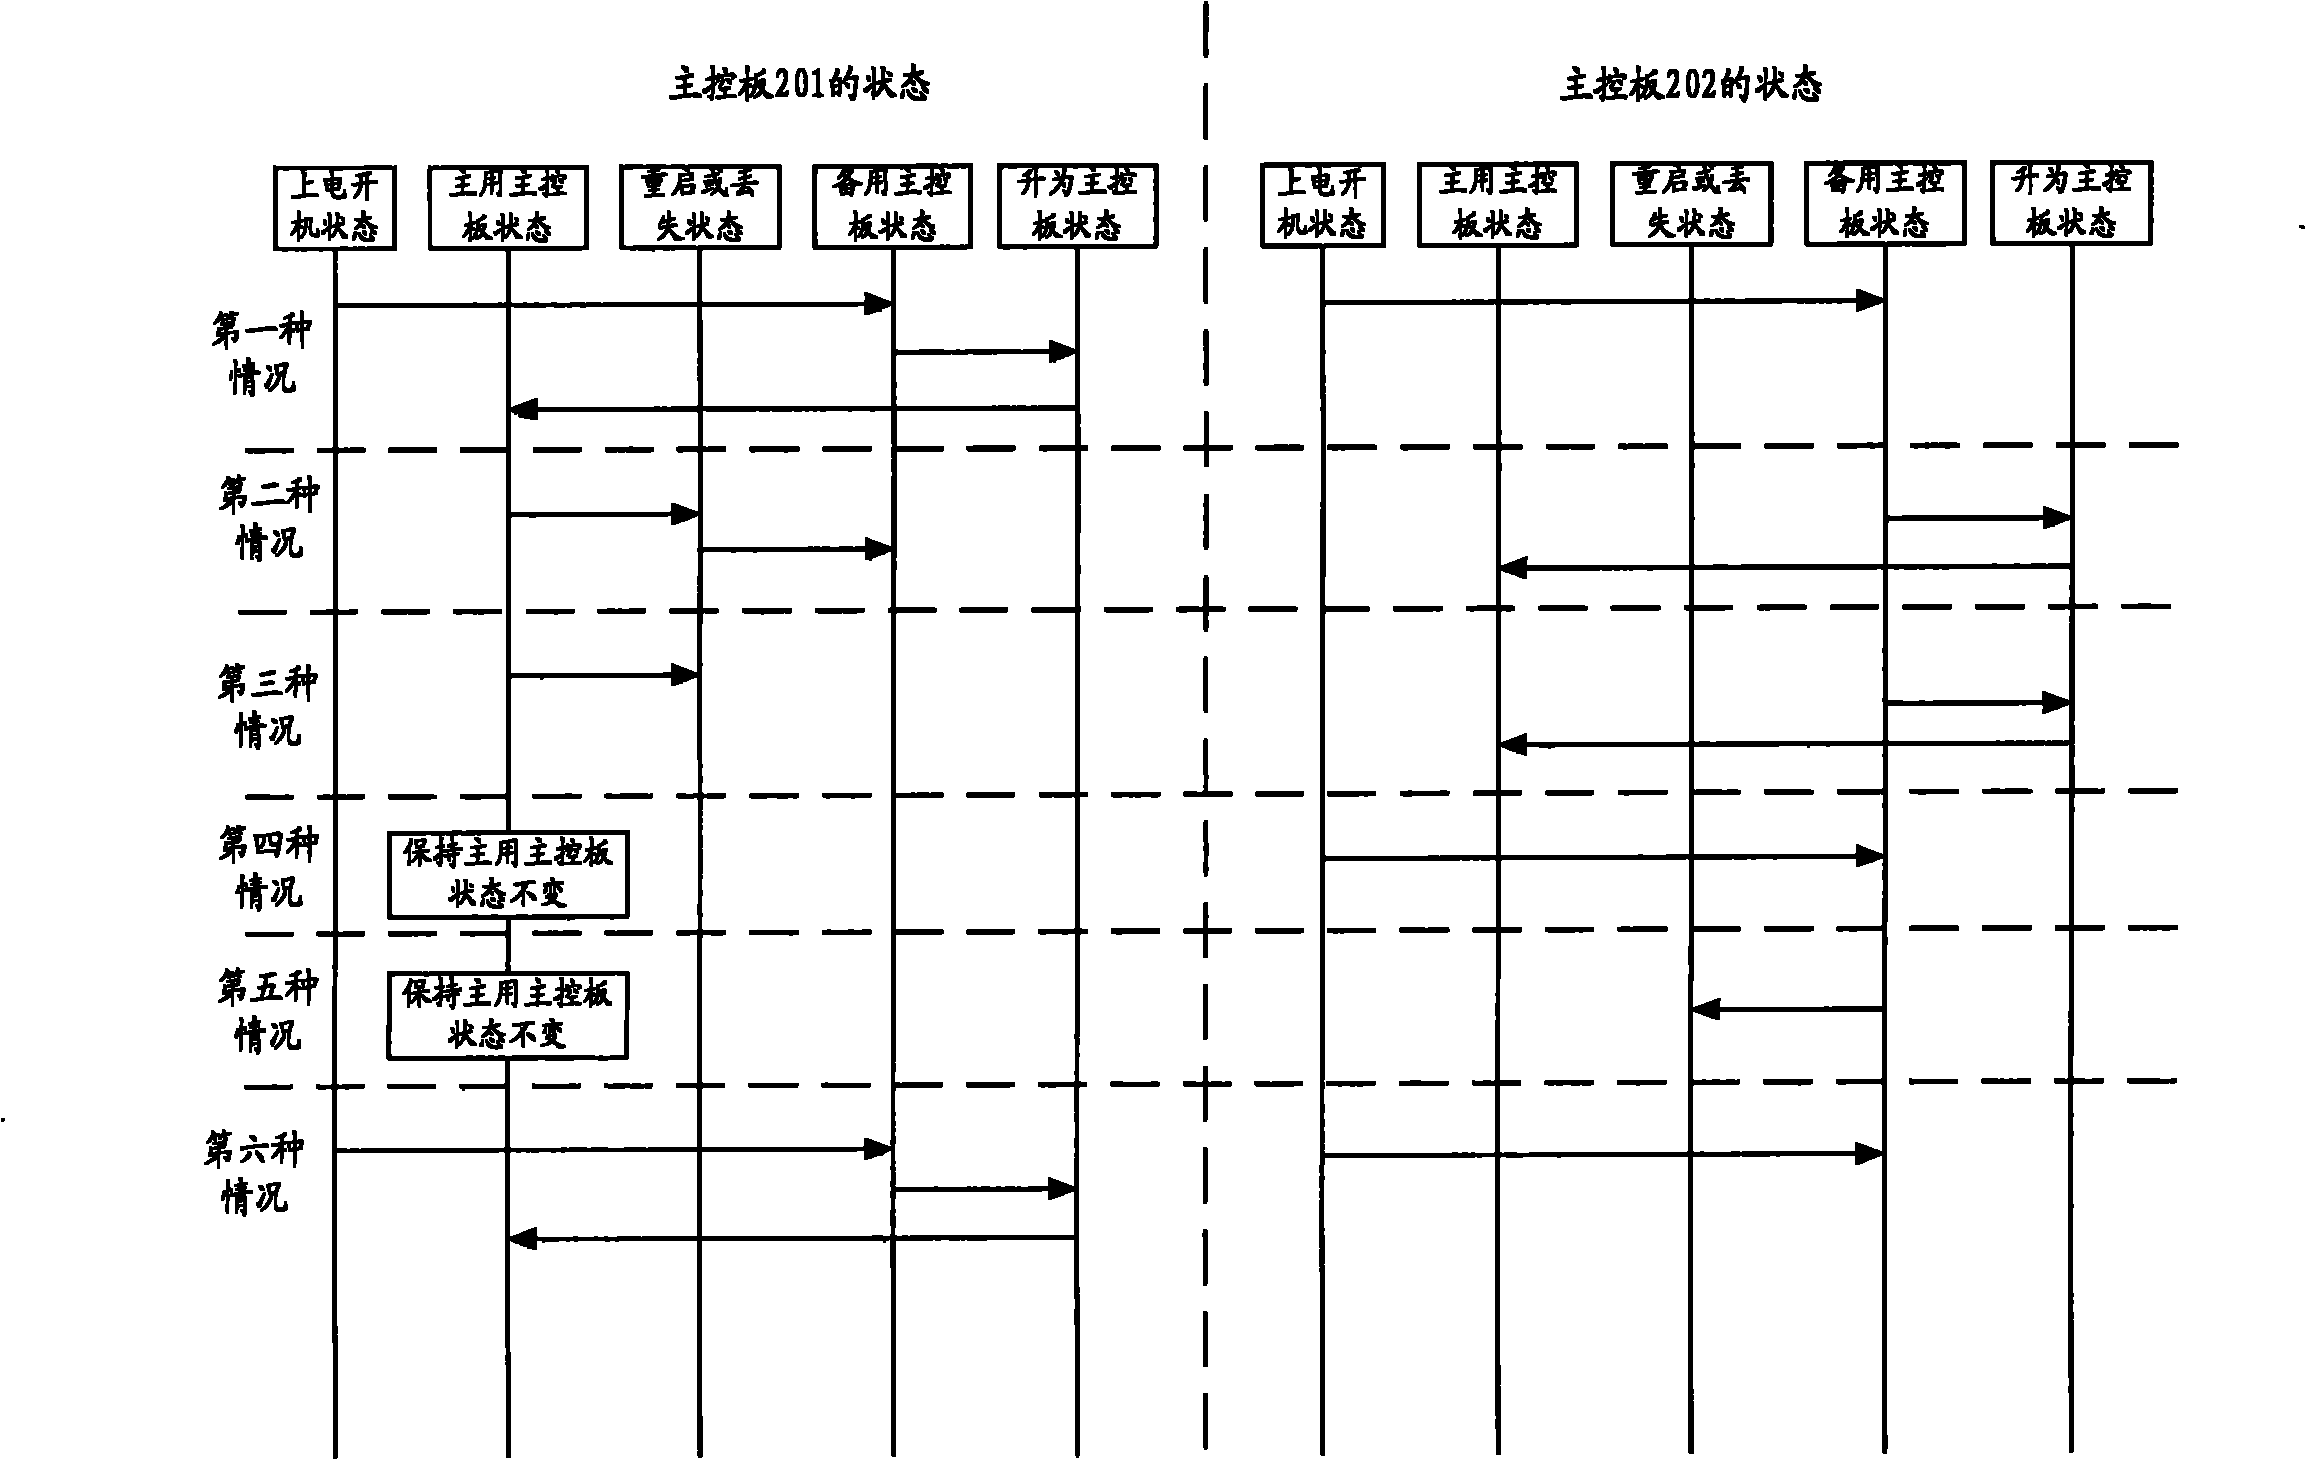 Main control board, embedded system and backup method for embedded system